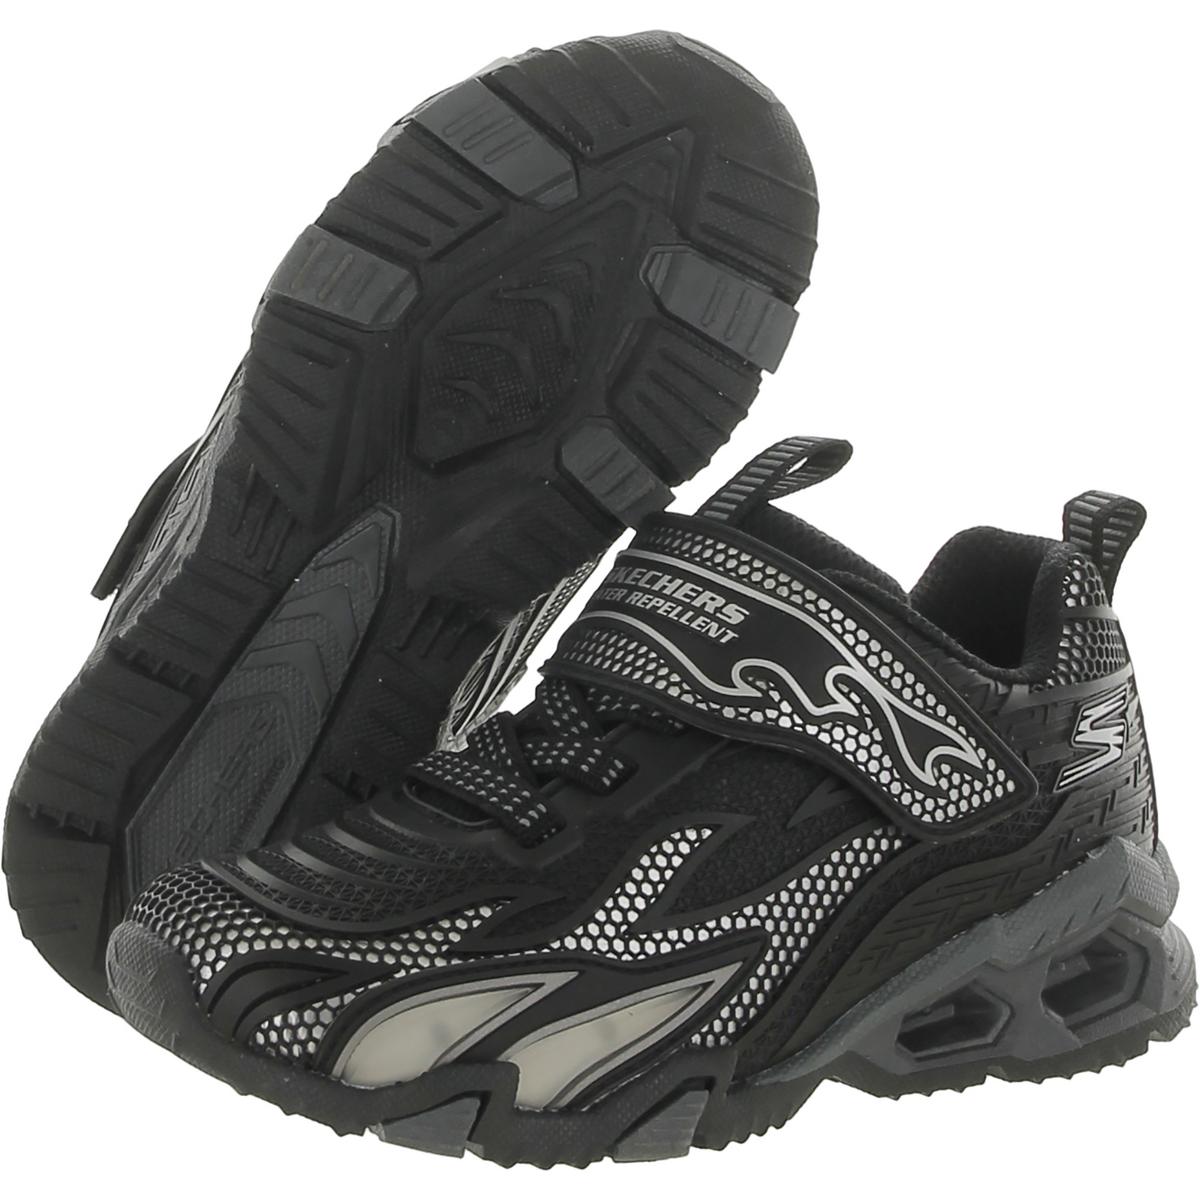 Skechers Hydro Boys Water Repellent Slip On Light-Up Shoes